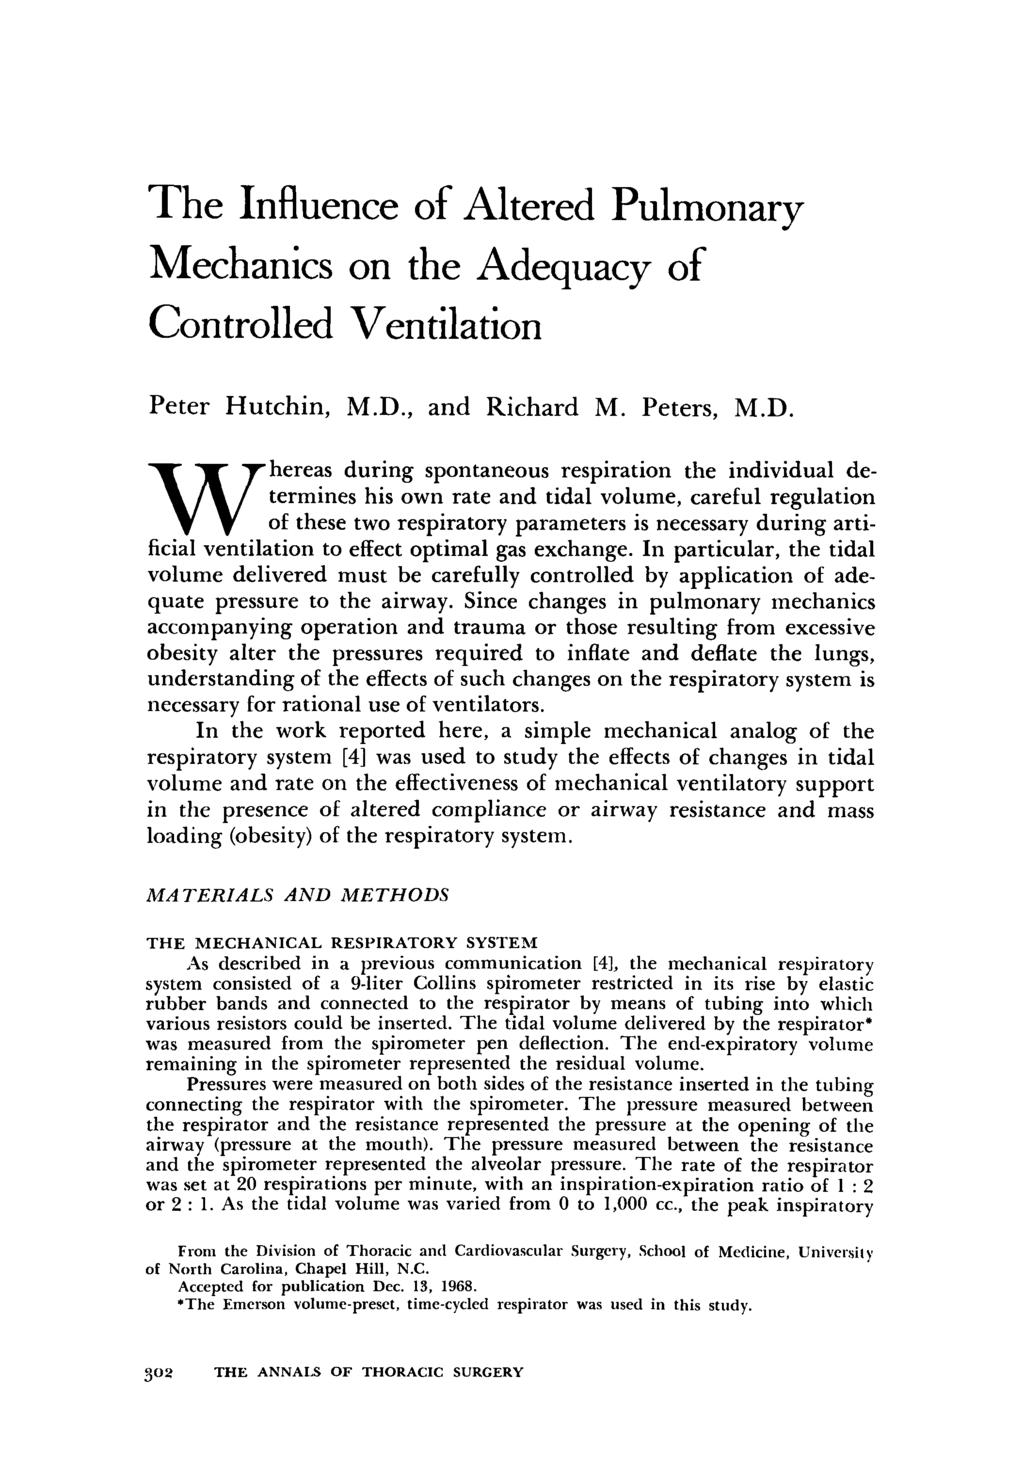 The Influence of Altered Pulmonarv J Mechanics on the Adequacy of Controlled Ventilation Peter Hutchin, M.D.